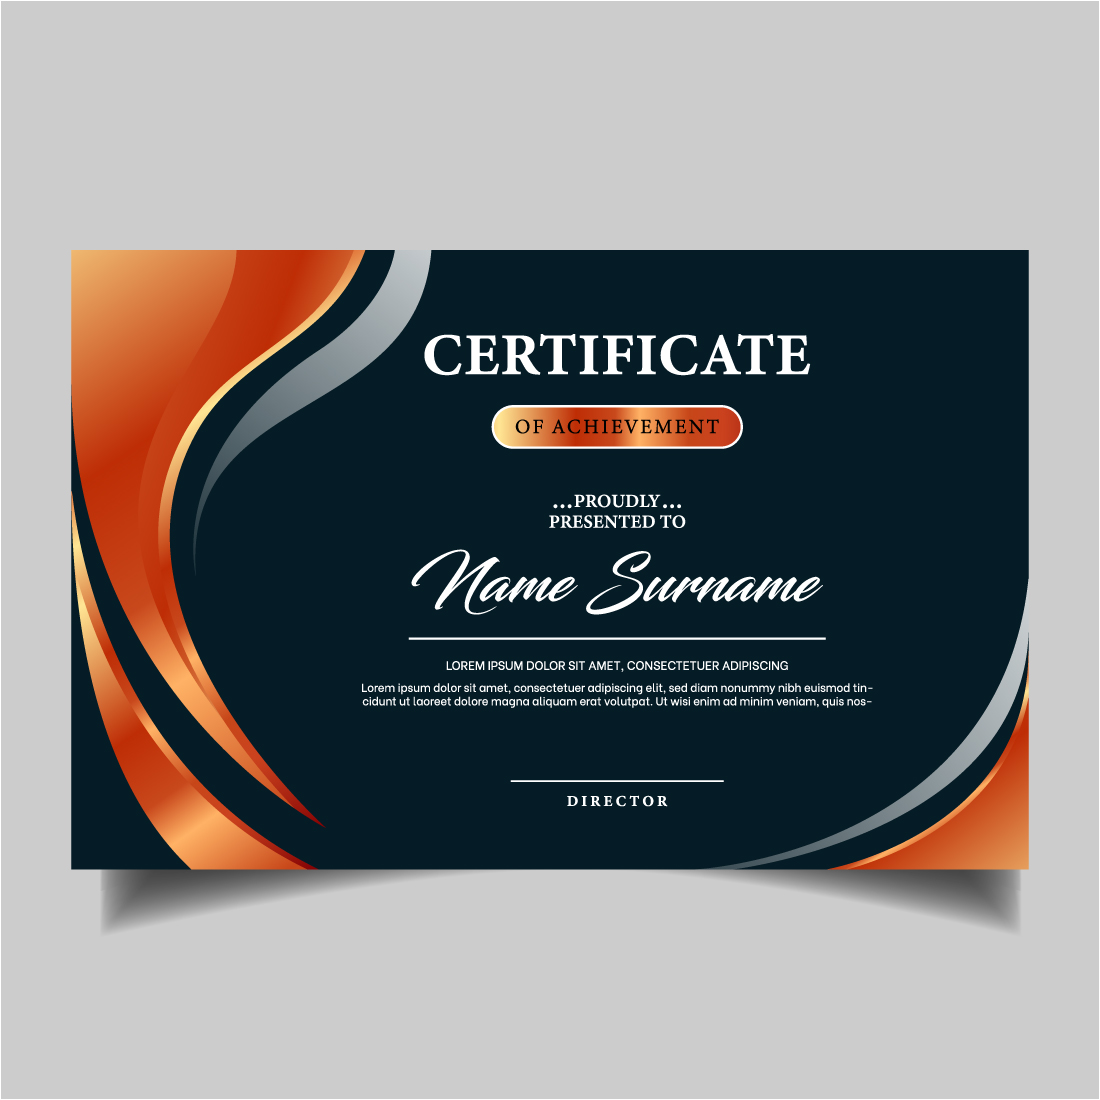 Modern and Luxurious Certificate Design Template.